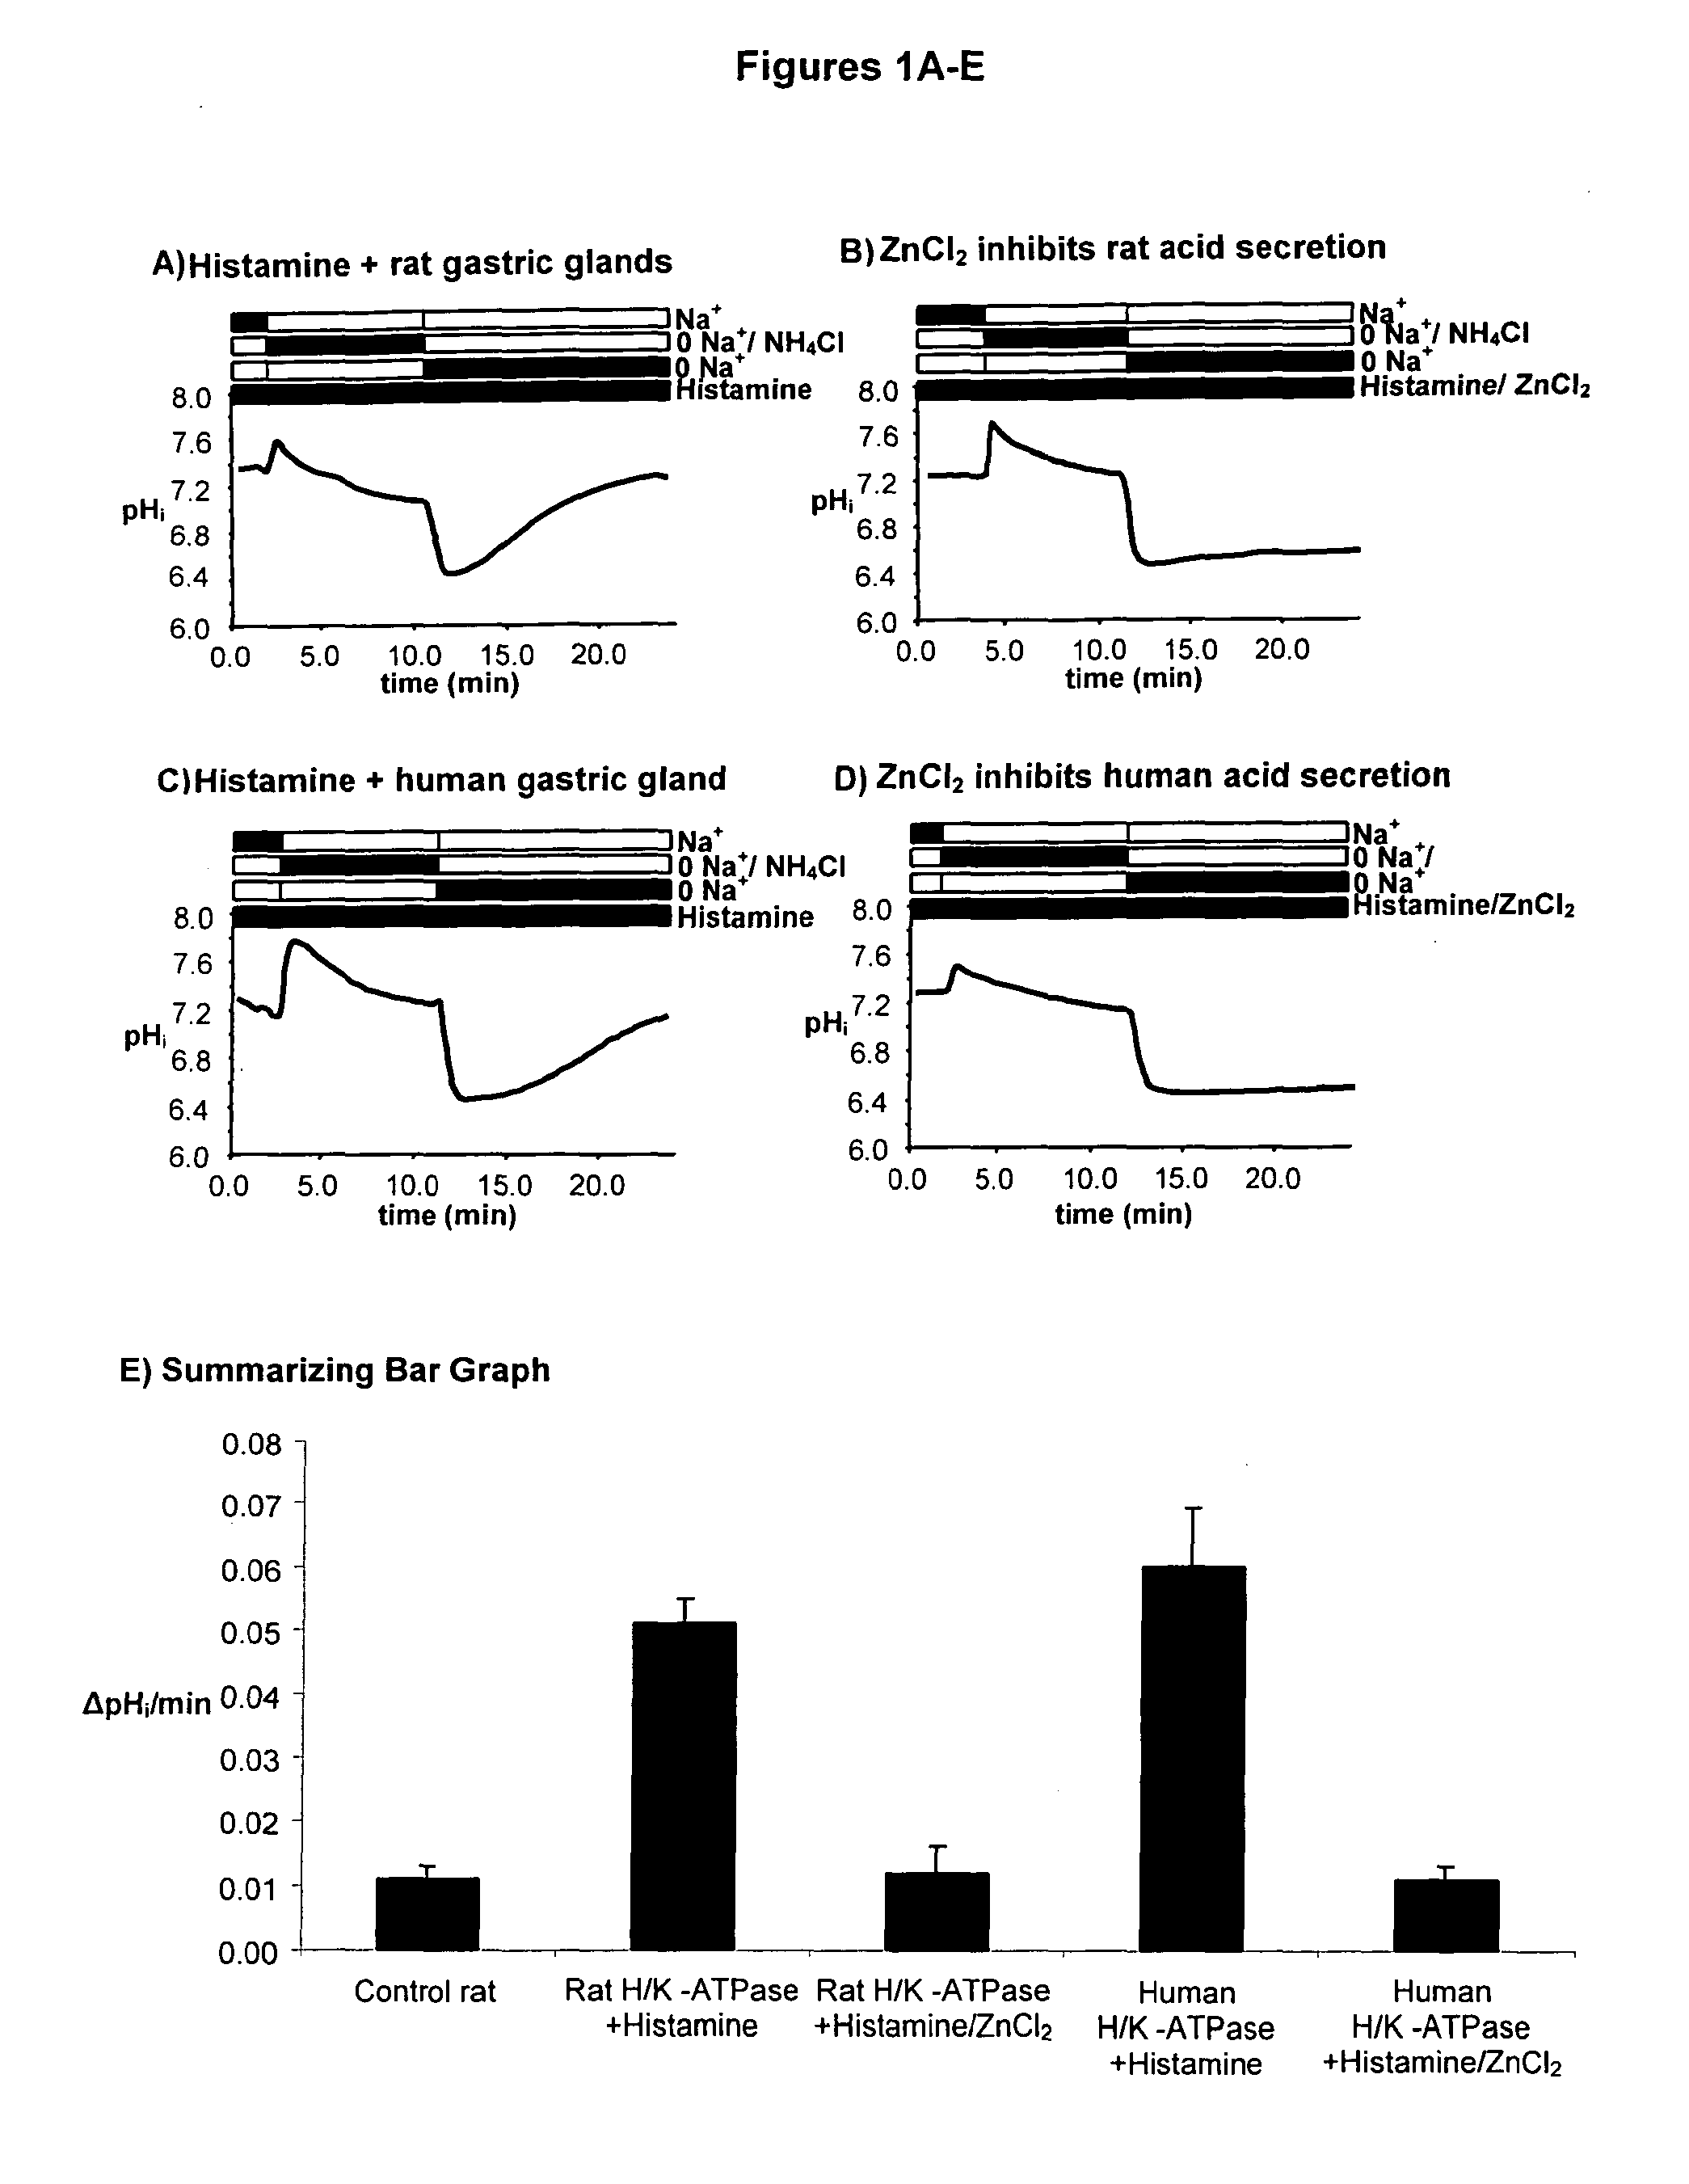 Compostions with enhanced bioavailability and fast acting inhibitor or gastric acid secretion